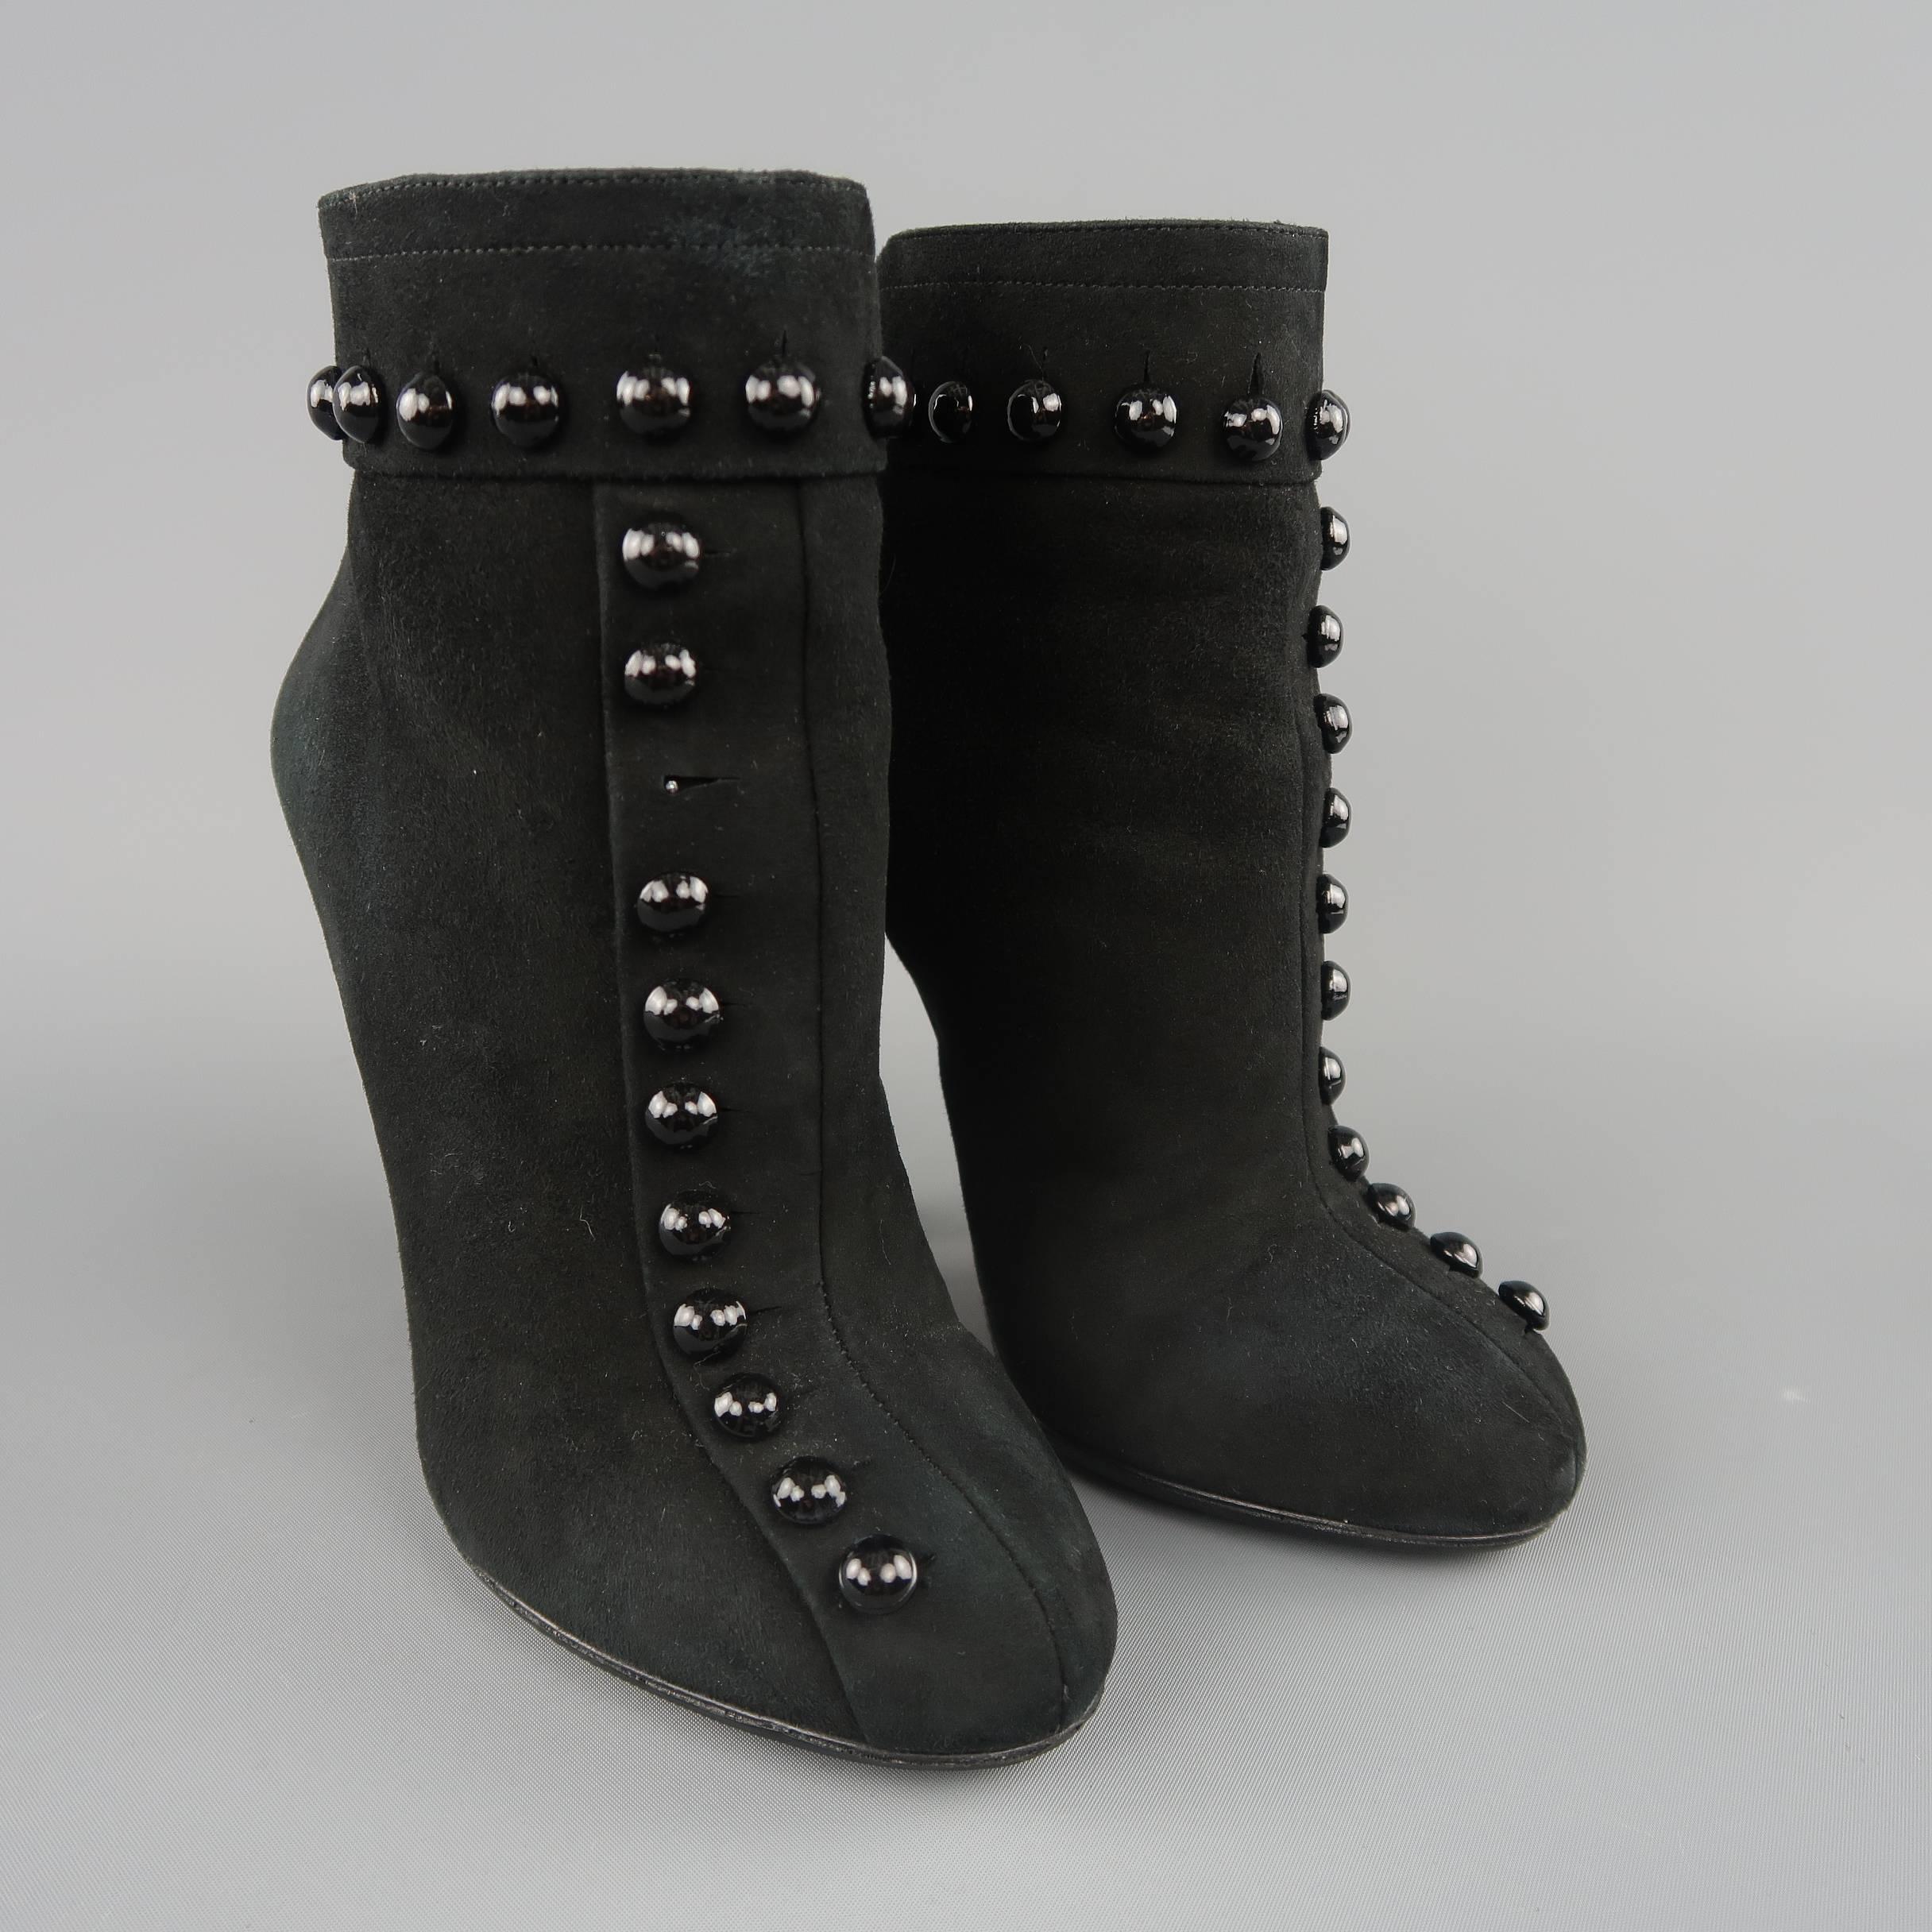 ALAIA booties come in black suede with a pointed toe, back zip closure, covered heel, and button stud details. Missing a button on right shoe. As-is. Otherwise great condition. With box. Made in Italy.
 
Fair Pre-Owned Condition.
Marked: IT 36.5
